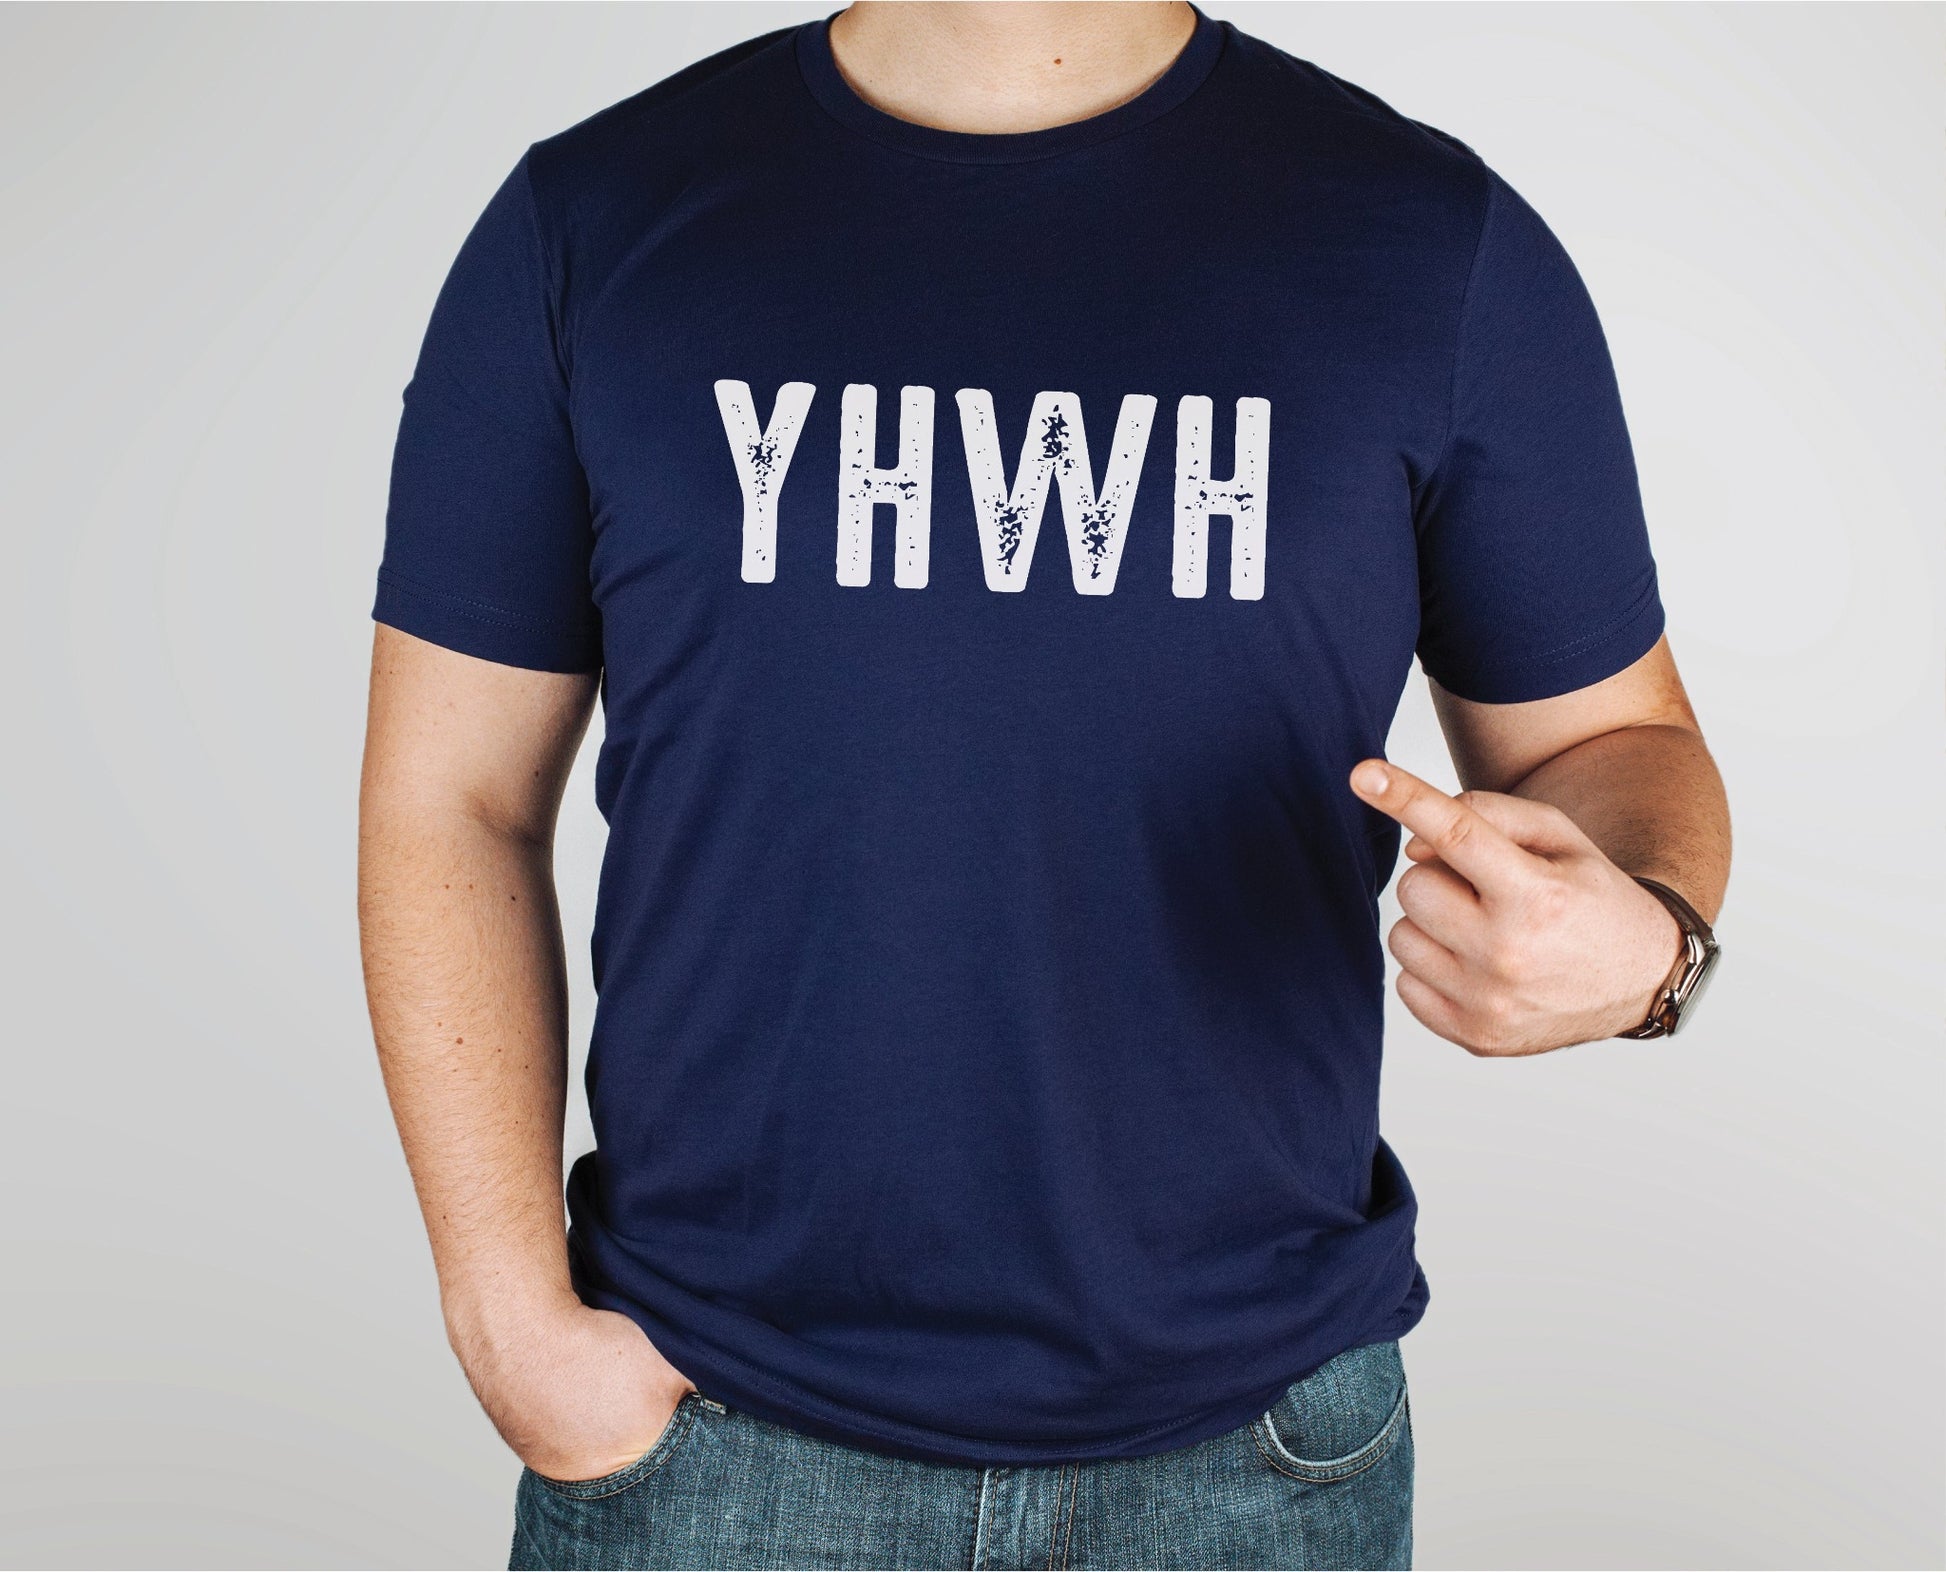 YHWH Hebrew Biblical Name of God Yahweh Christian aesthetic distressed design printed in white on soft navy blue unisex t-shirt for men